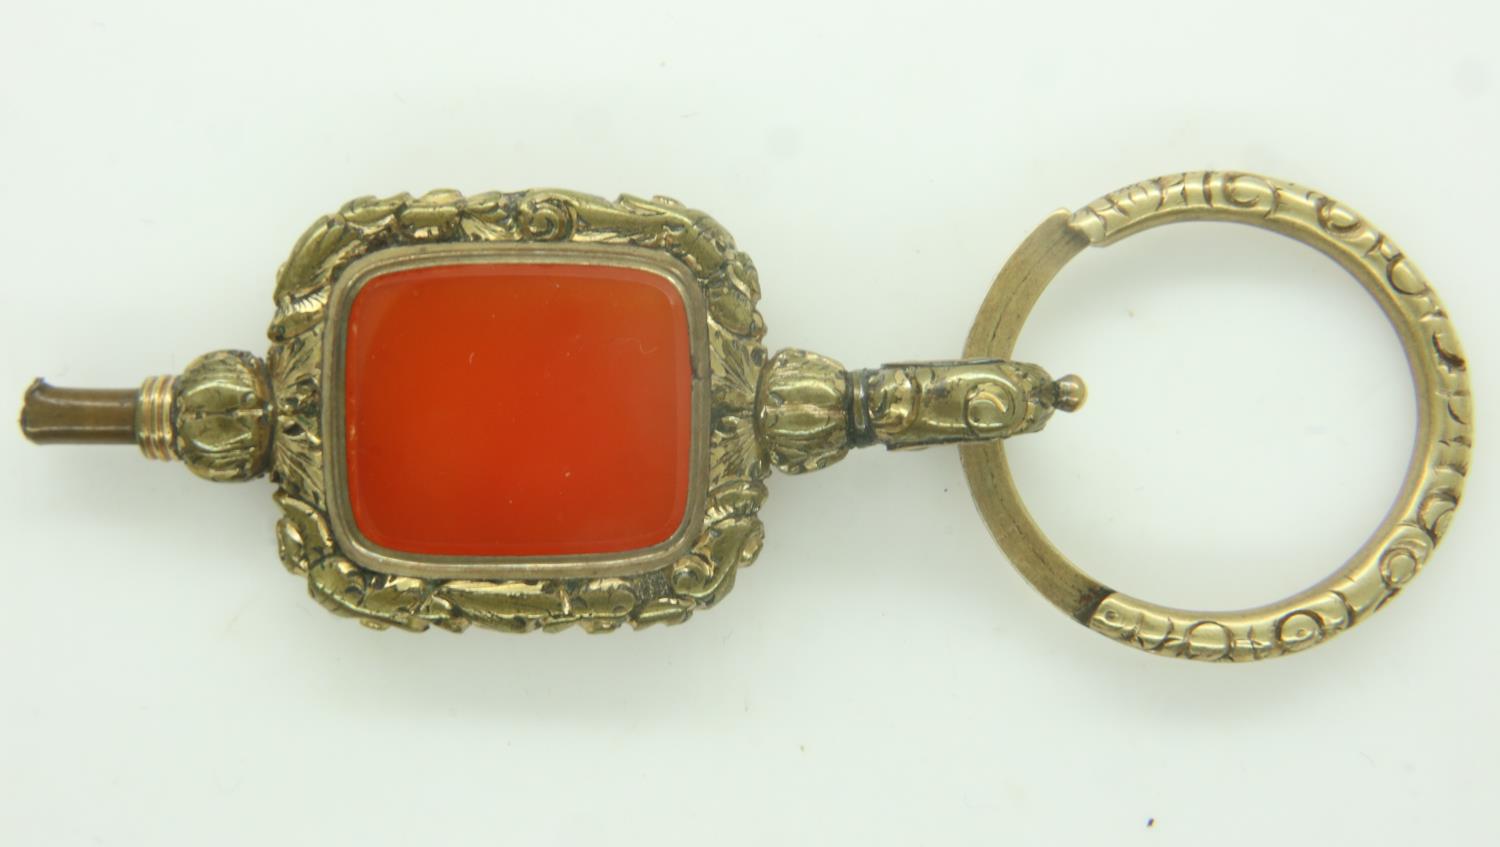 A 19th century over-sized gilt-metal pocket watch key, set with a panel of agate. P&P Group 0 (£6+